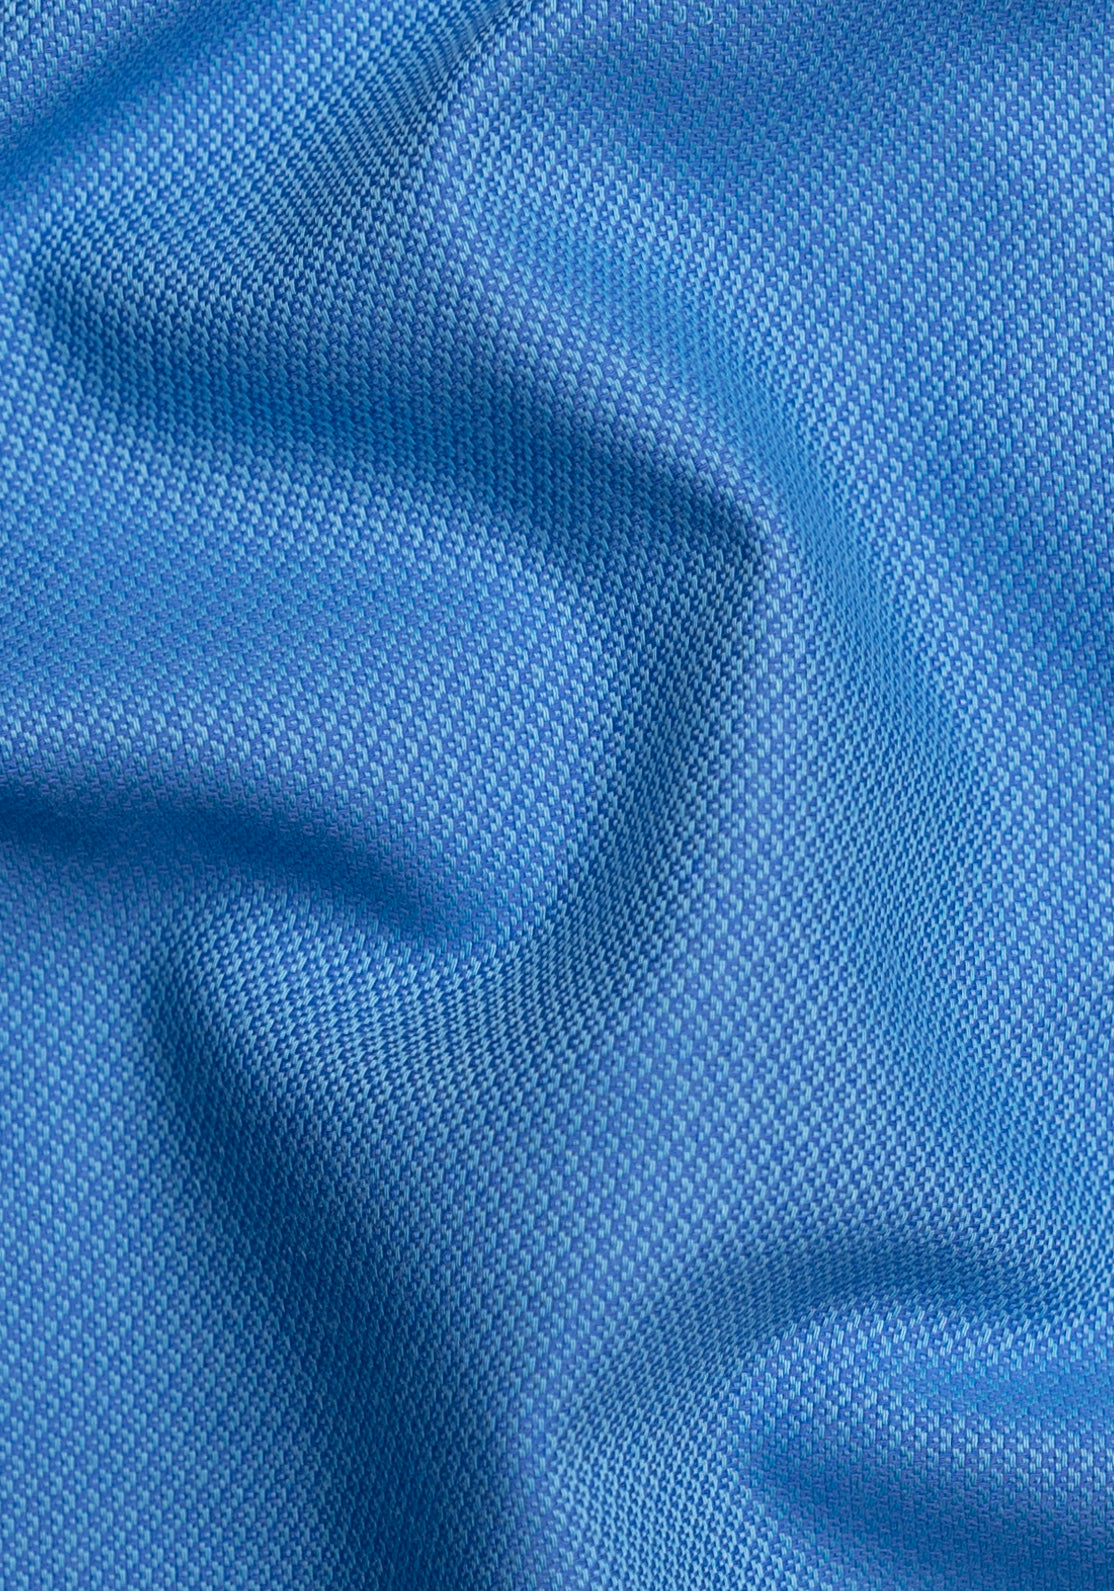 Egyptian Dual Blue Structured Stretch